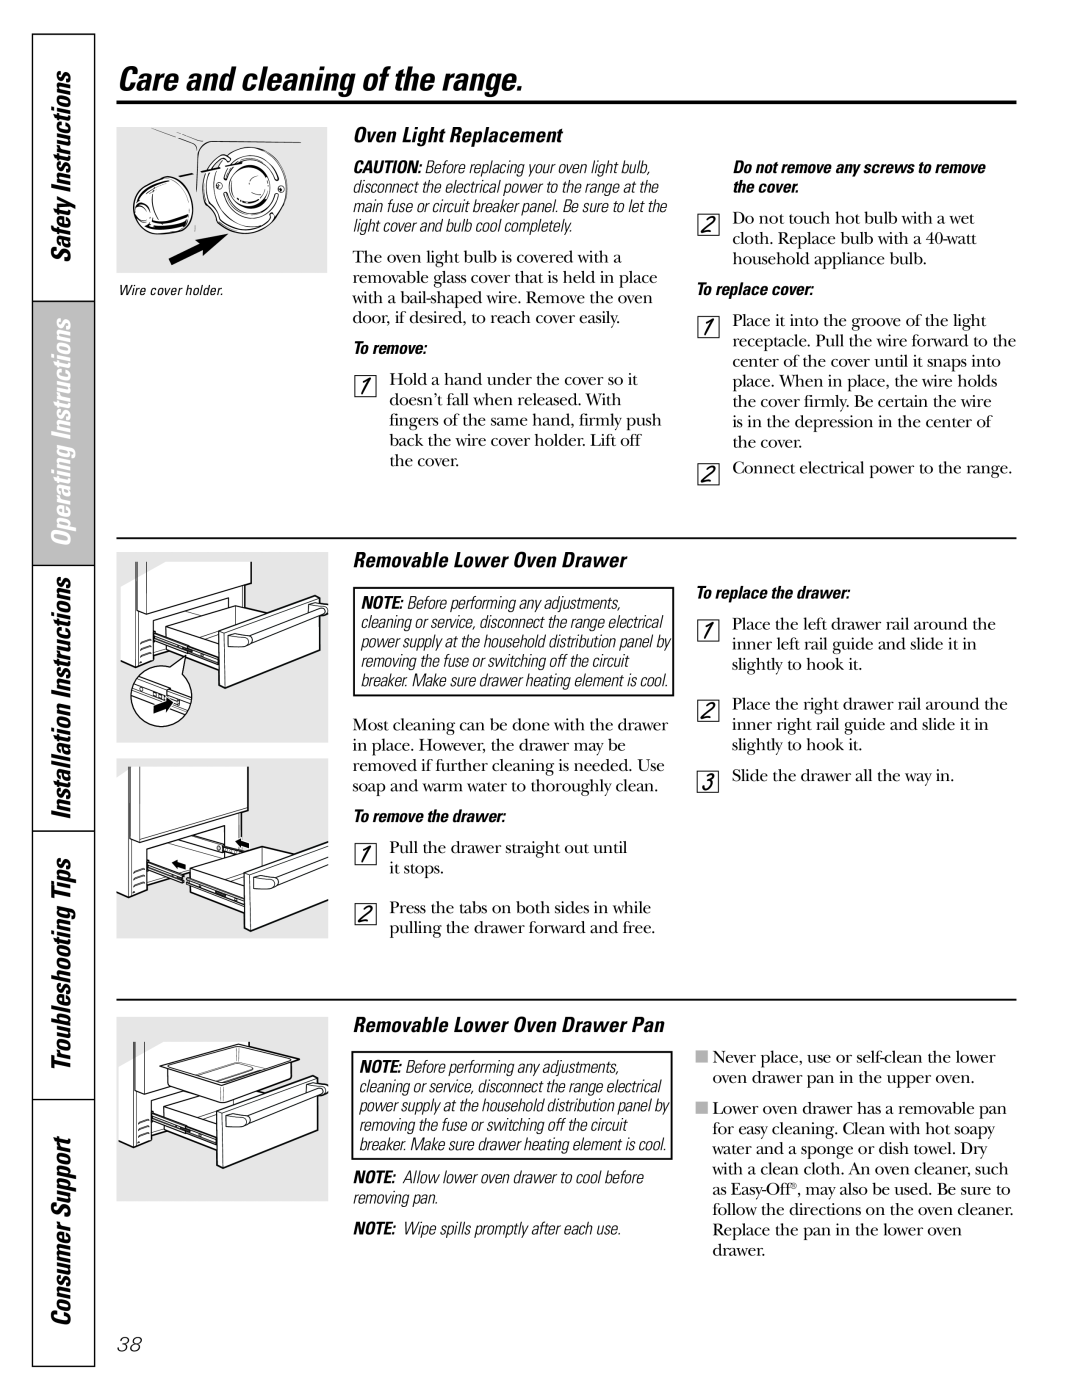 GE CGS980 SupportConsumer, Operating Instructions Safety Instructions, Oven Light Replacement, Removable Lower Oven Drawer 